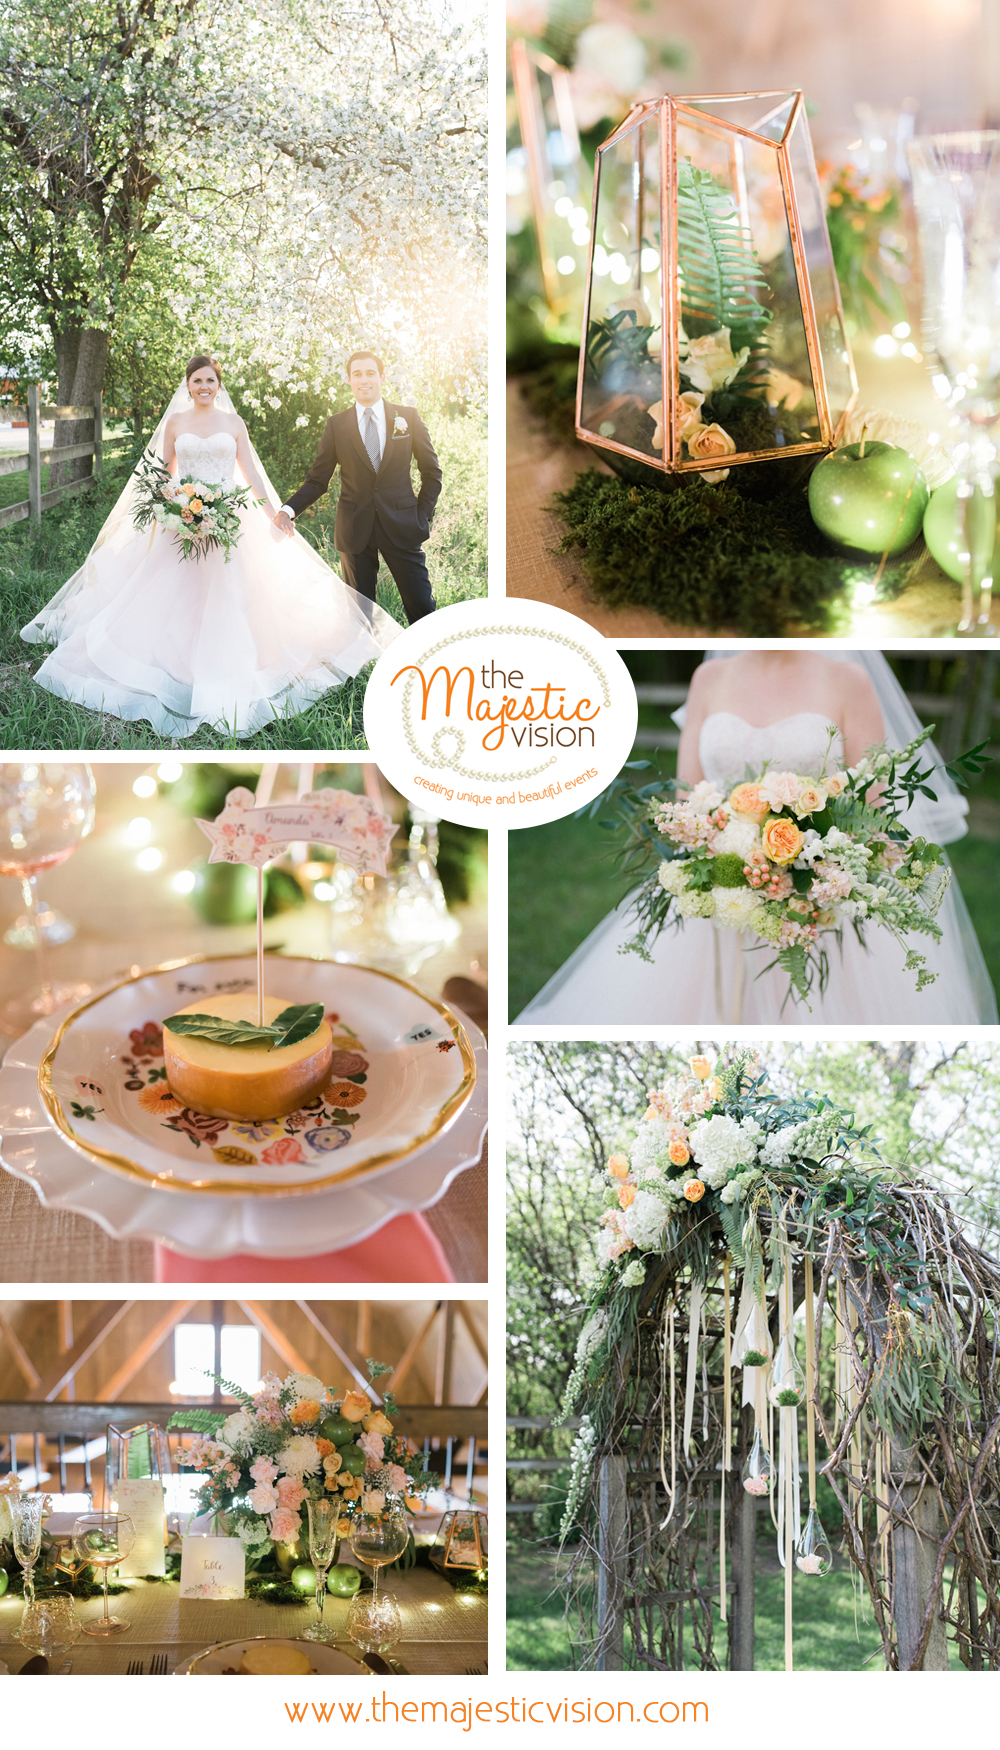 Elegant Blush and Pink Barn Wedding | The Majestic Vision Wedding Planning | Rustic Manor in Milwaukee, WI | www.themajesticvision.com | Elizabeth Haase Photography